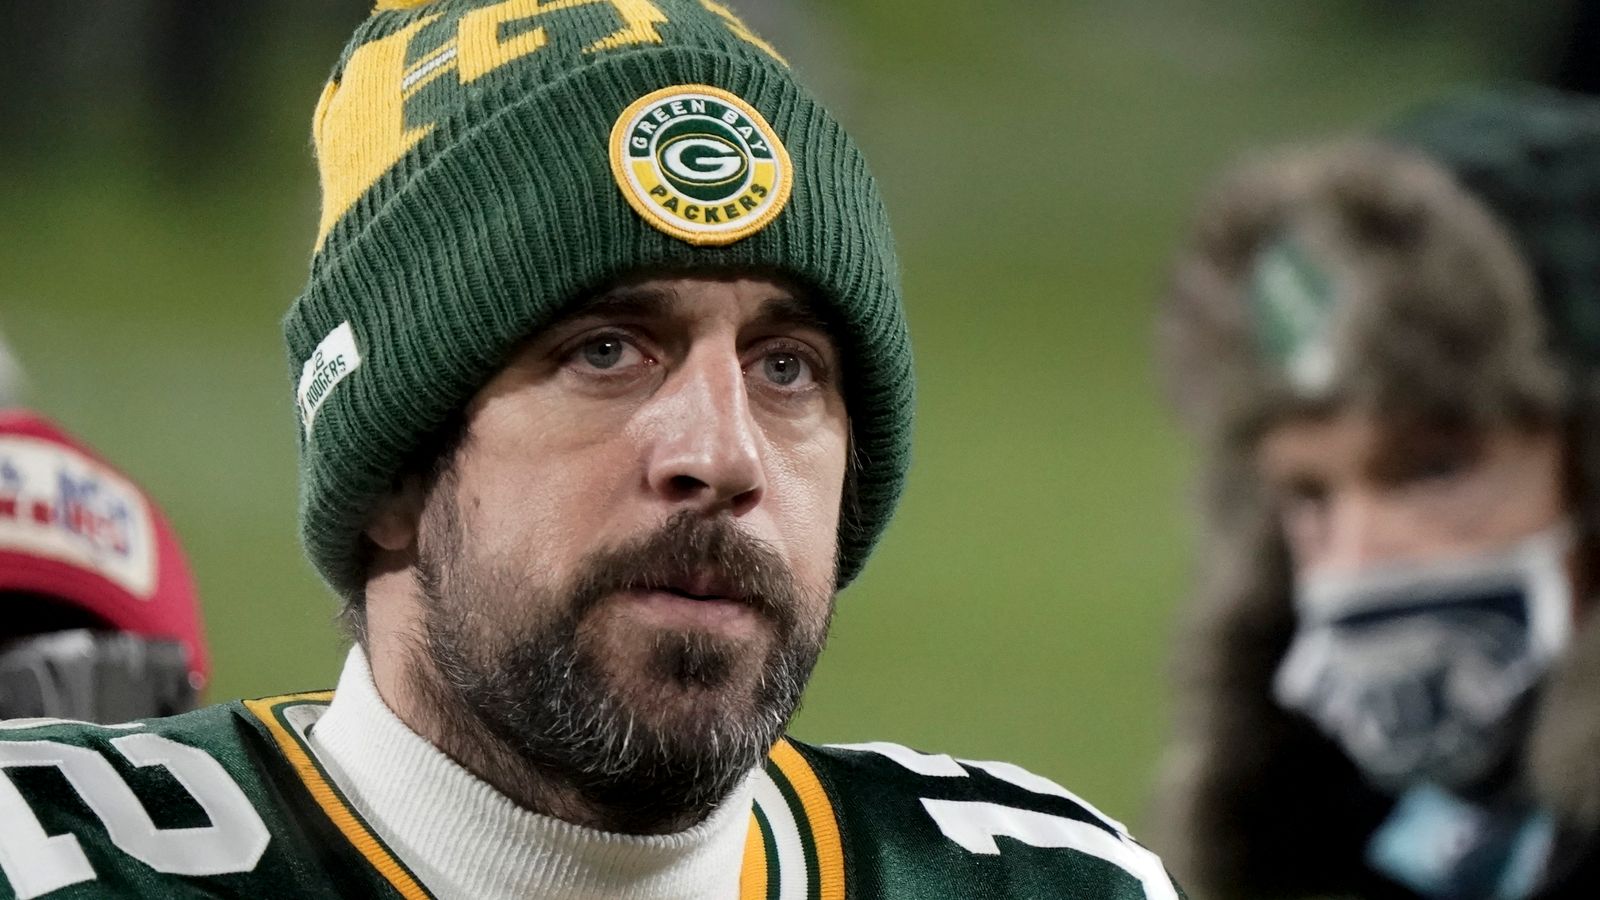 Aaron Rodgers Quarterback Expects To Play For Green Bay Packers Next Season Nfl News Sky Sports